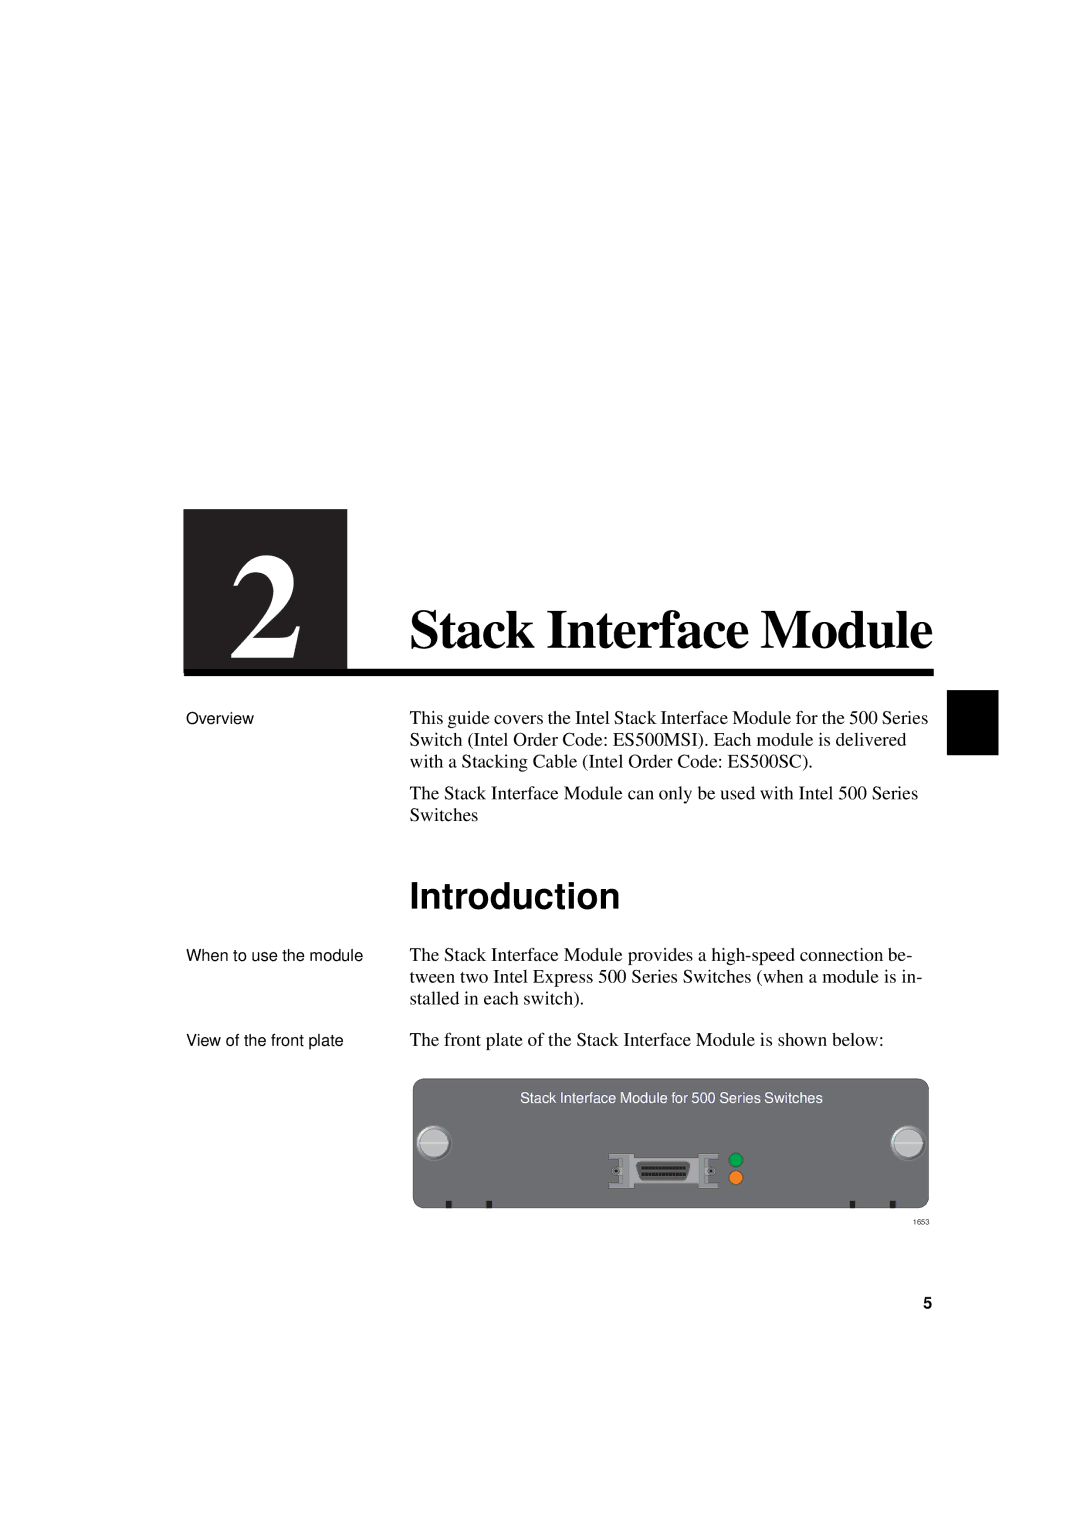 Intel 500 manual Stack Interface Module, Introduction 